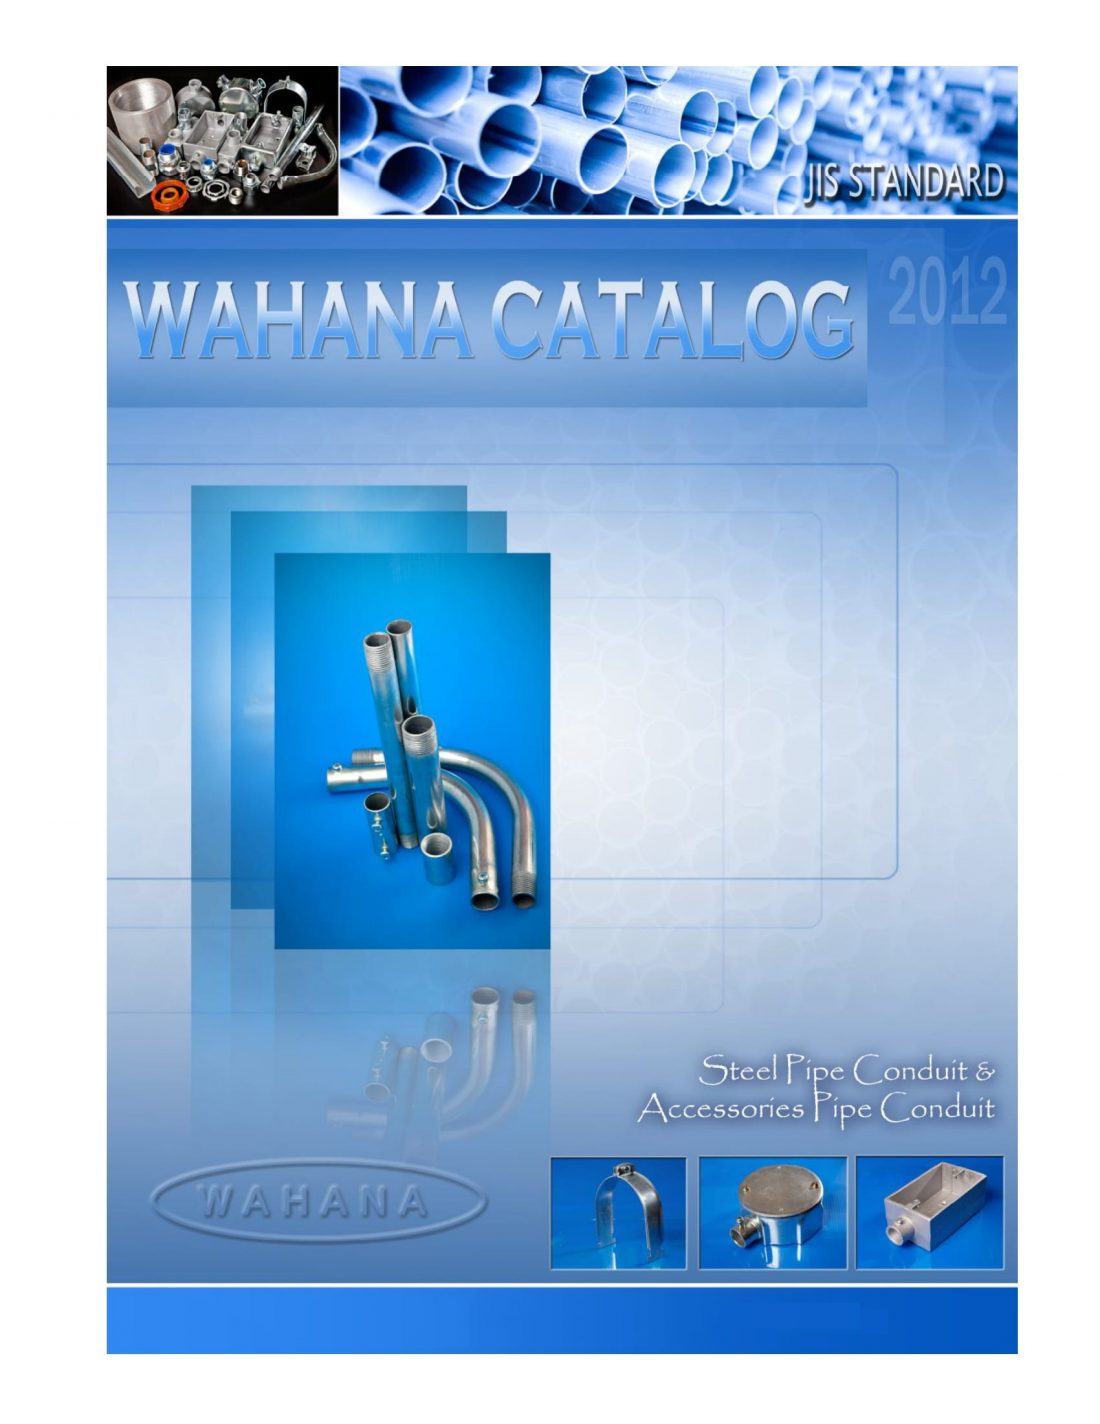 Catalogue Product - WMD-01 new